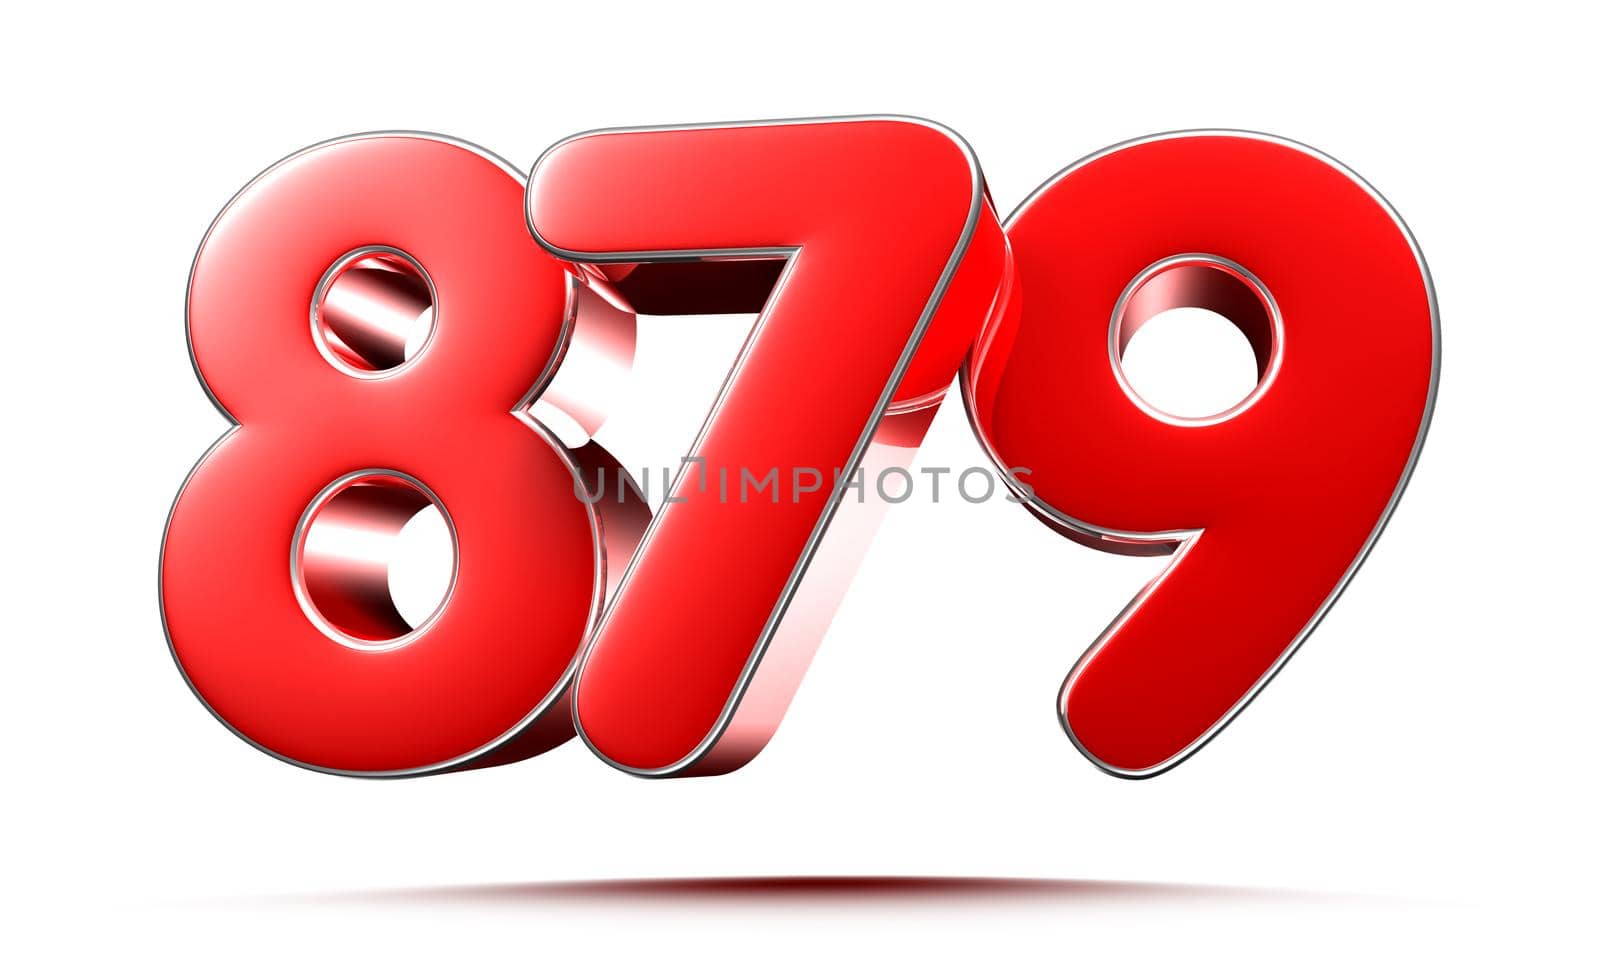 Rounded red numbers 879 on white background 3D illustration with clipping path